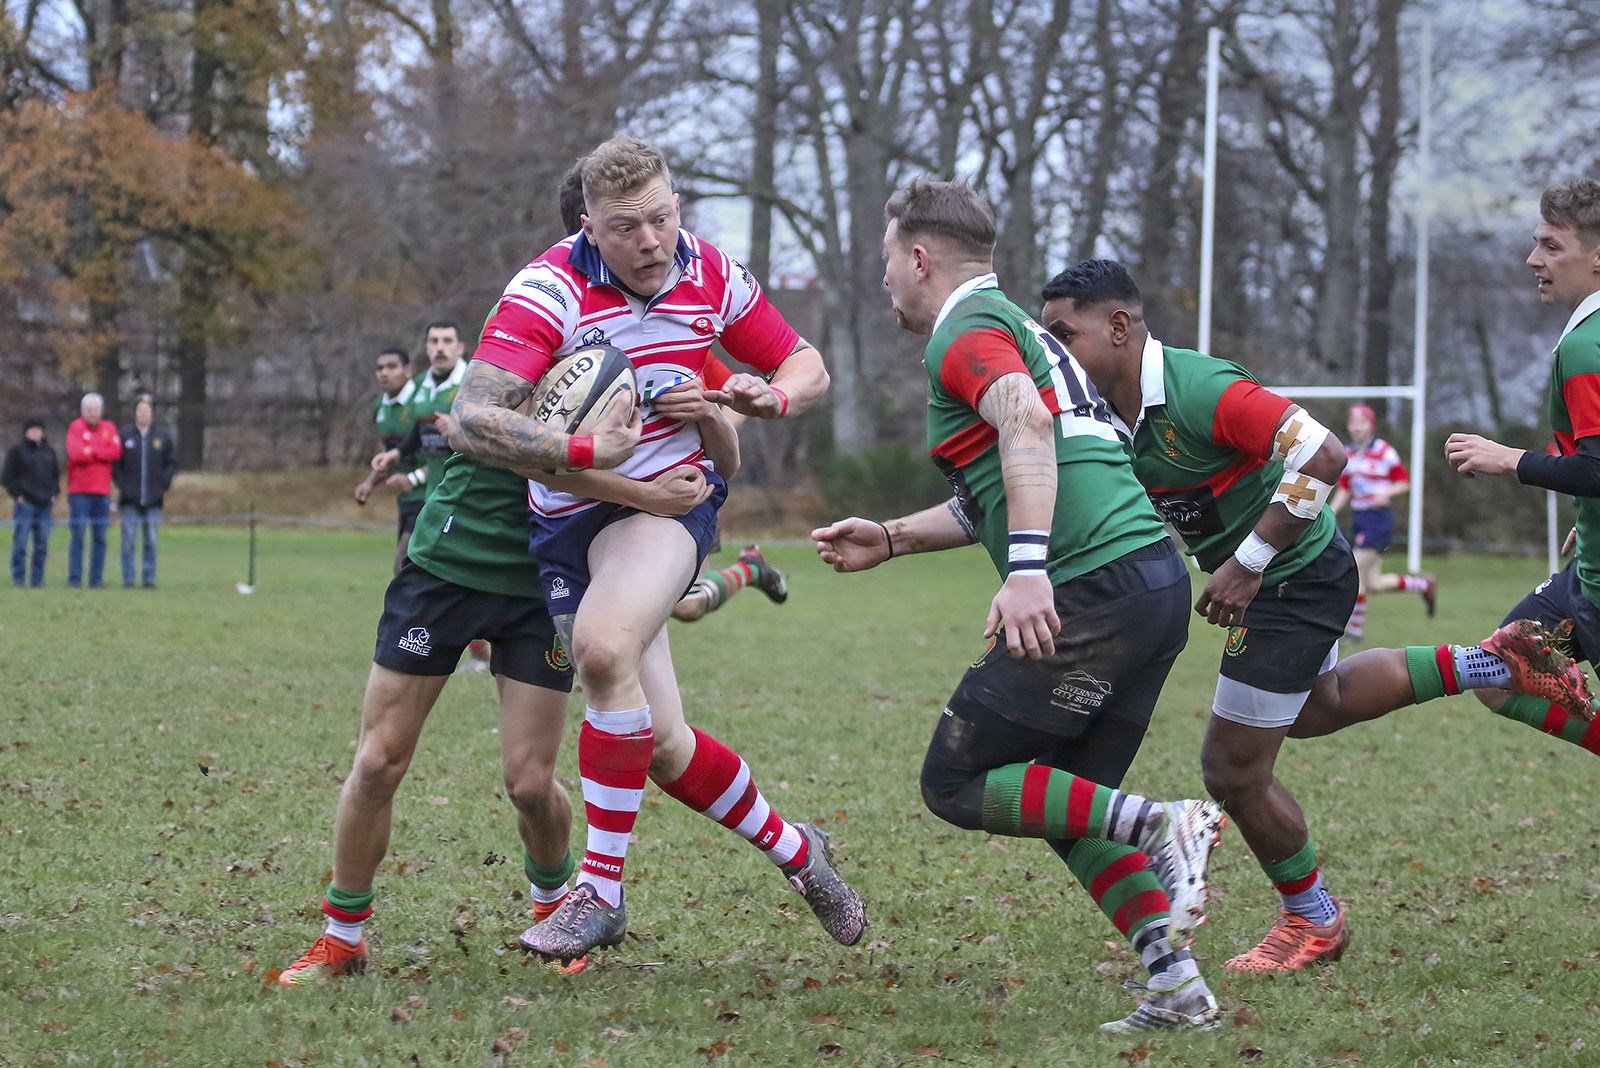 Lewis Scott takes on the defence. Picture: John MacGregor